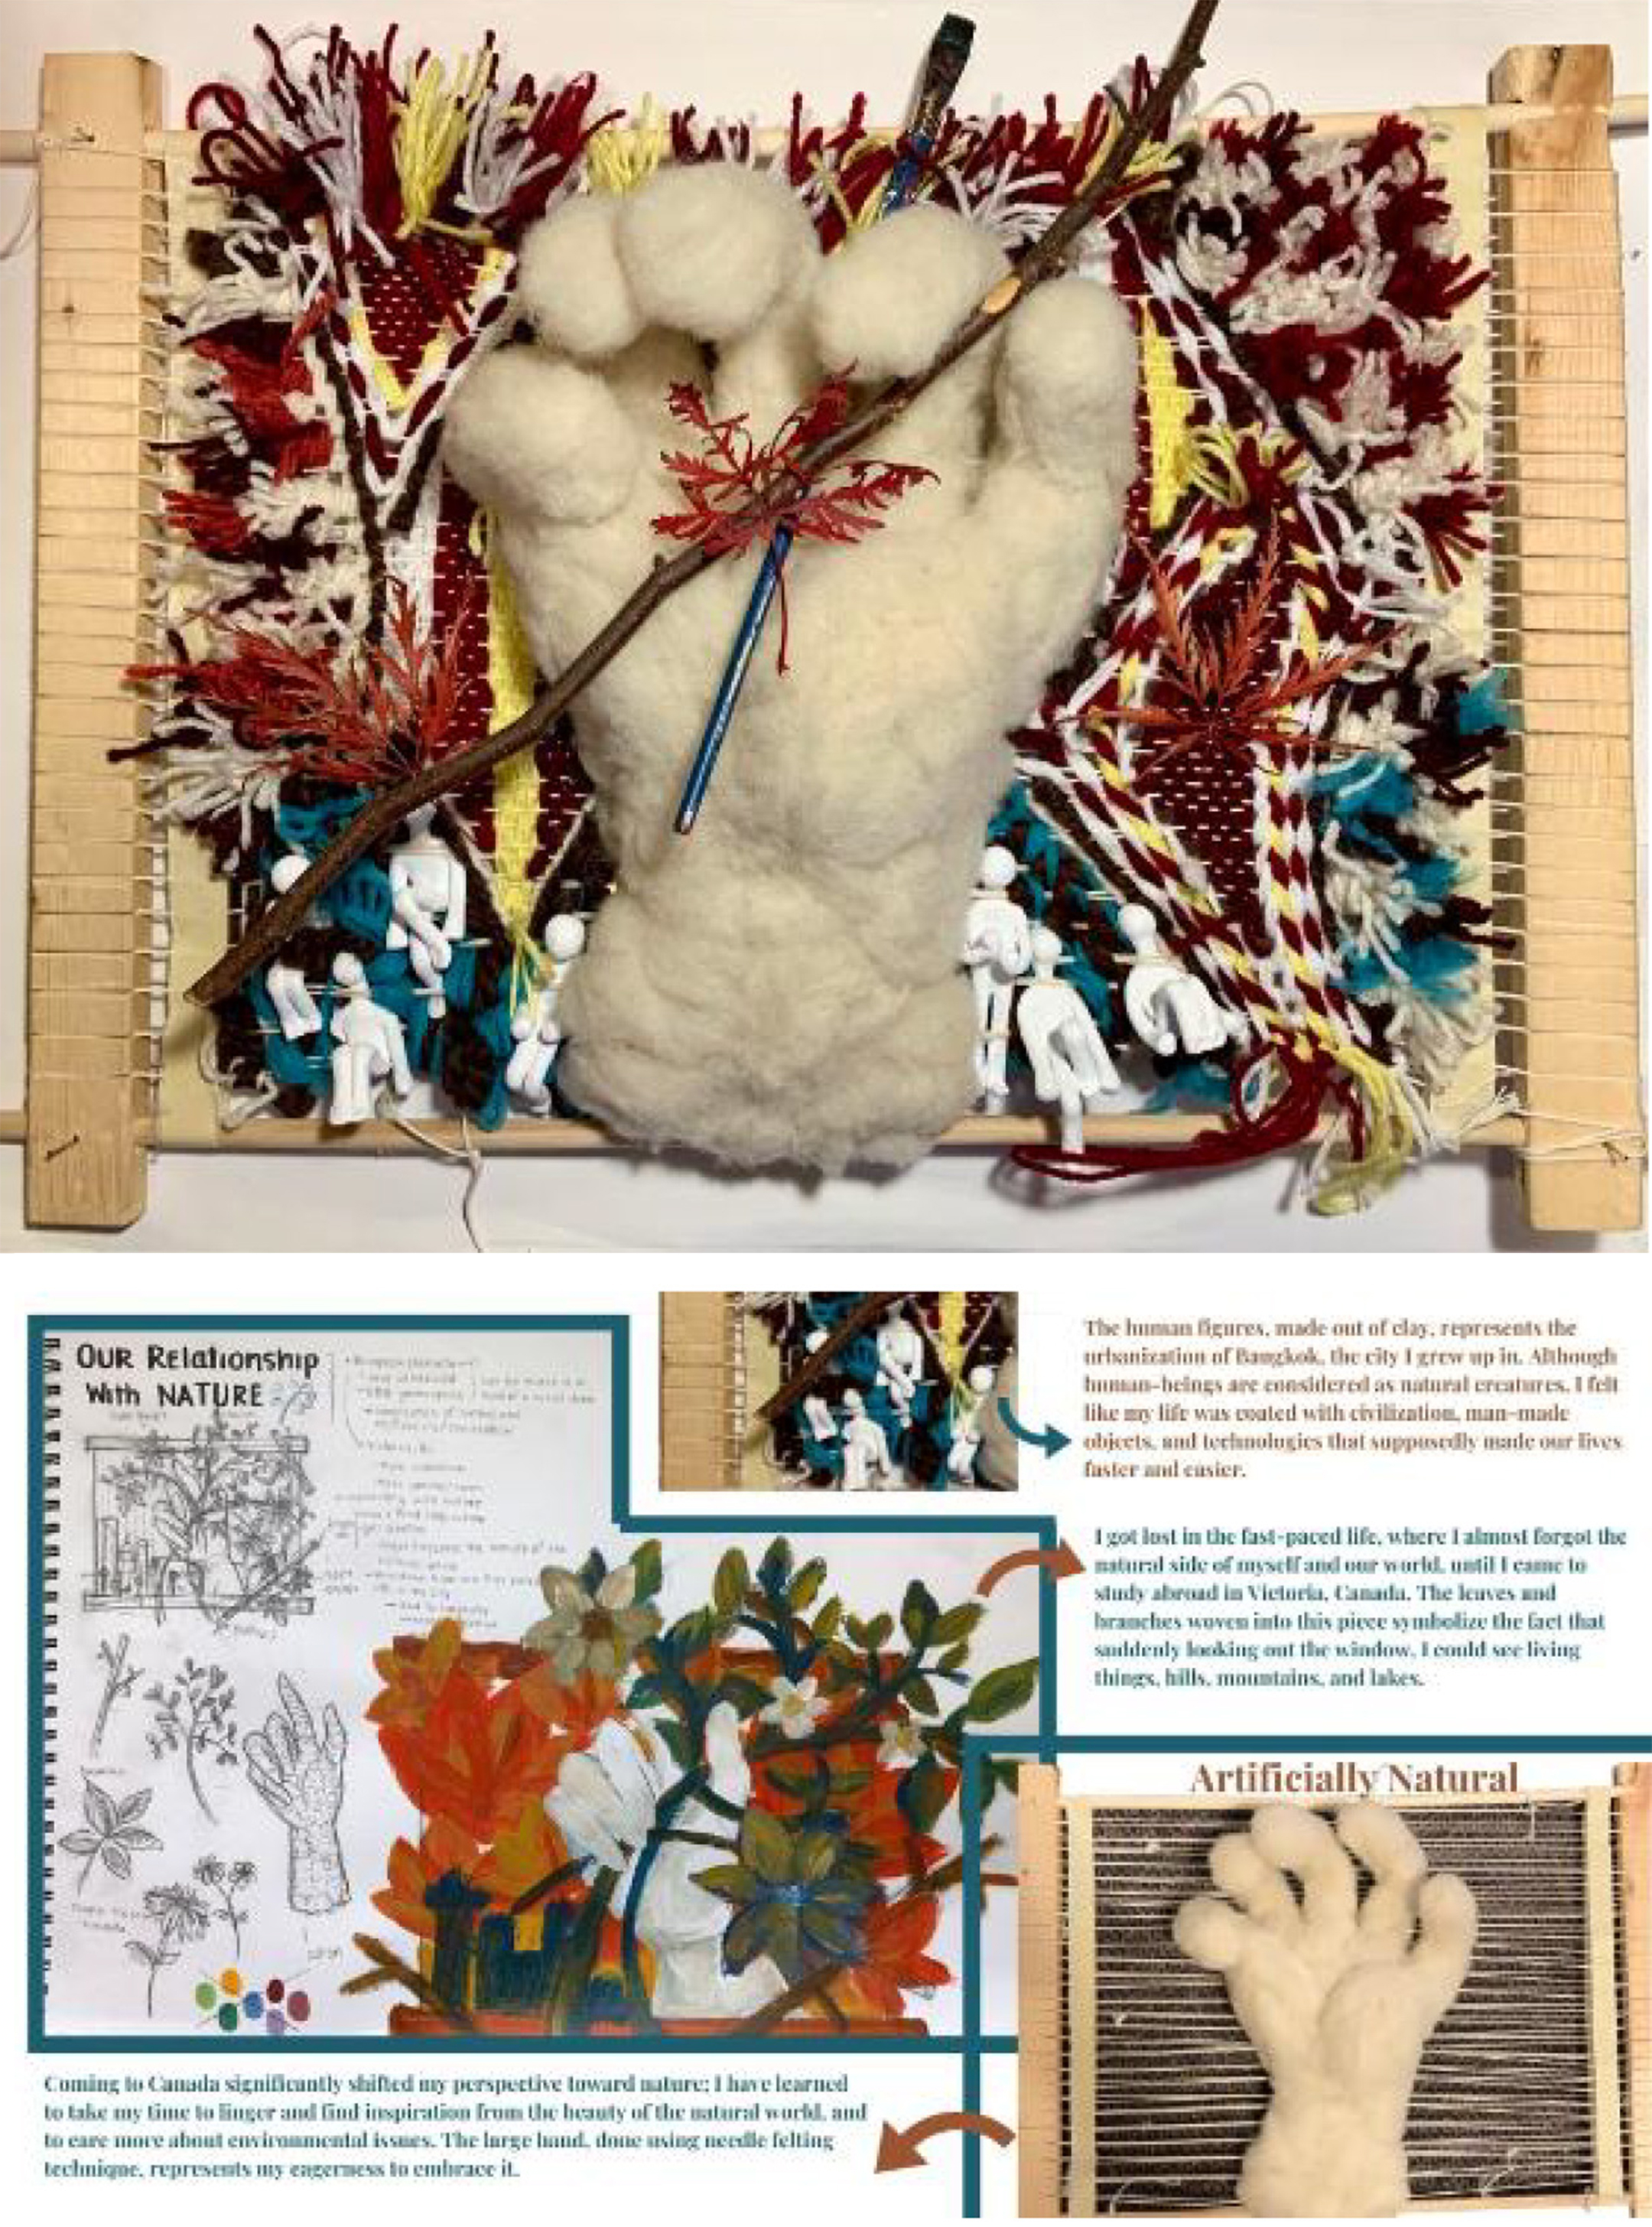 Photo and an illustration of a hand made out of yarn and surrounded by flower-like objects